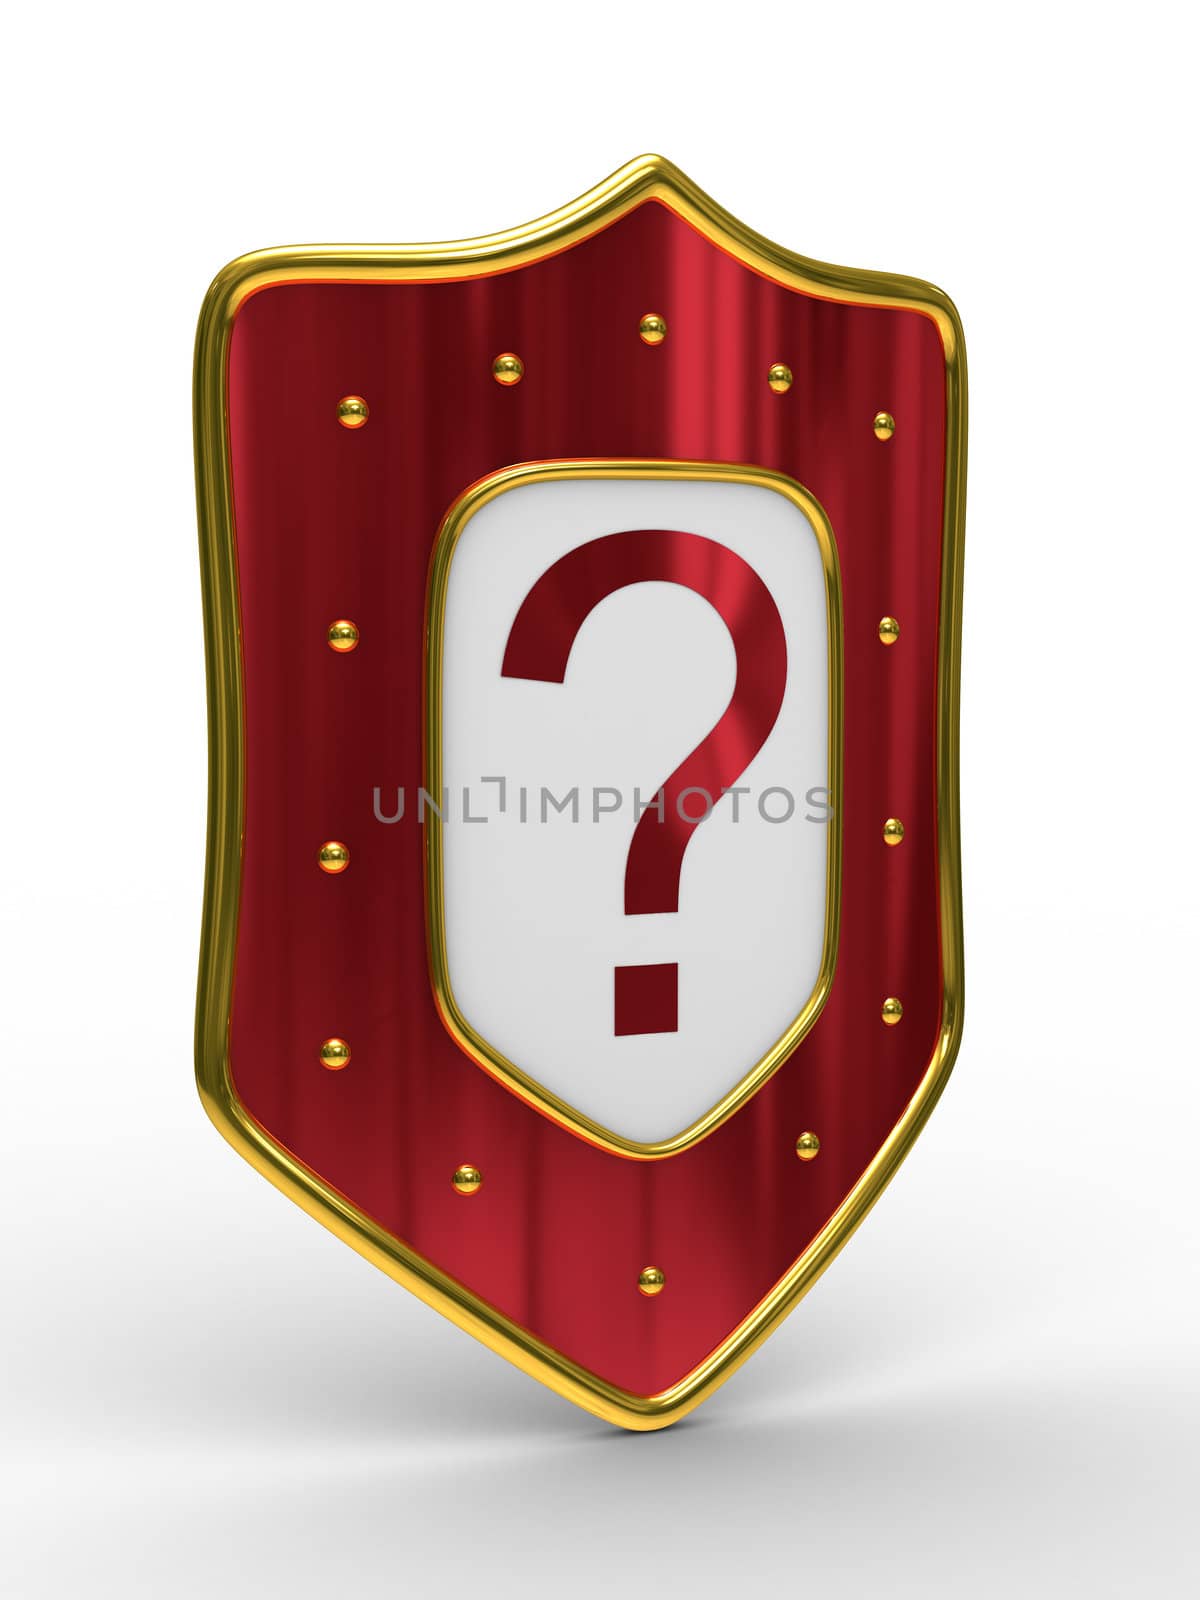 red shield on white background. isolated 3D image